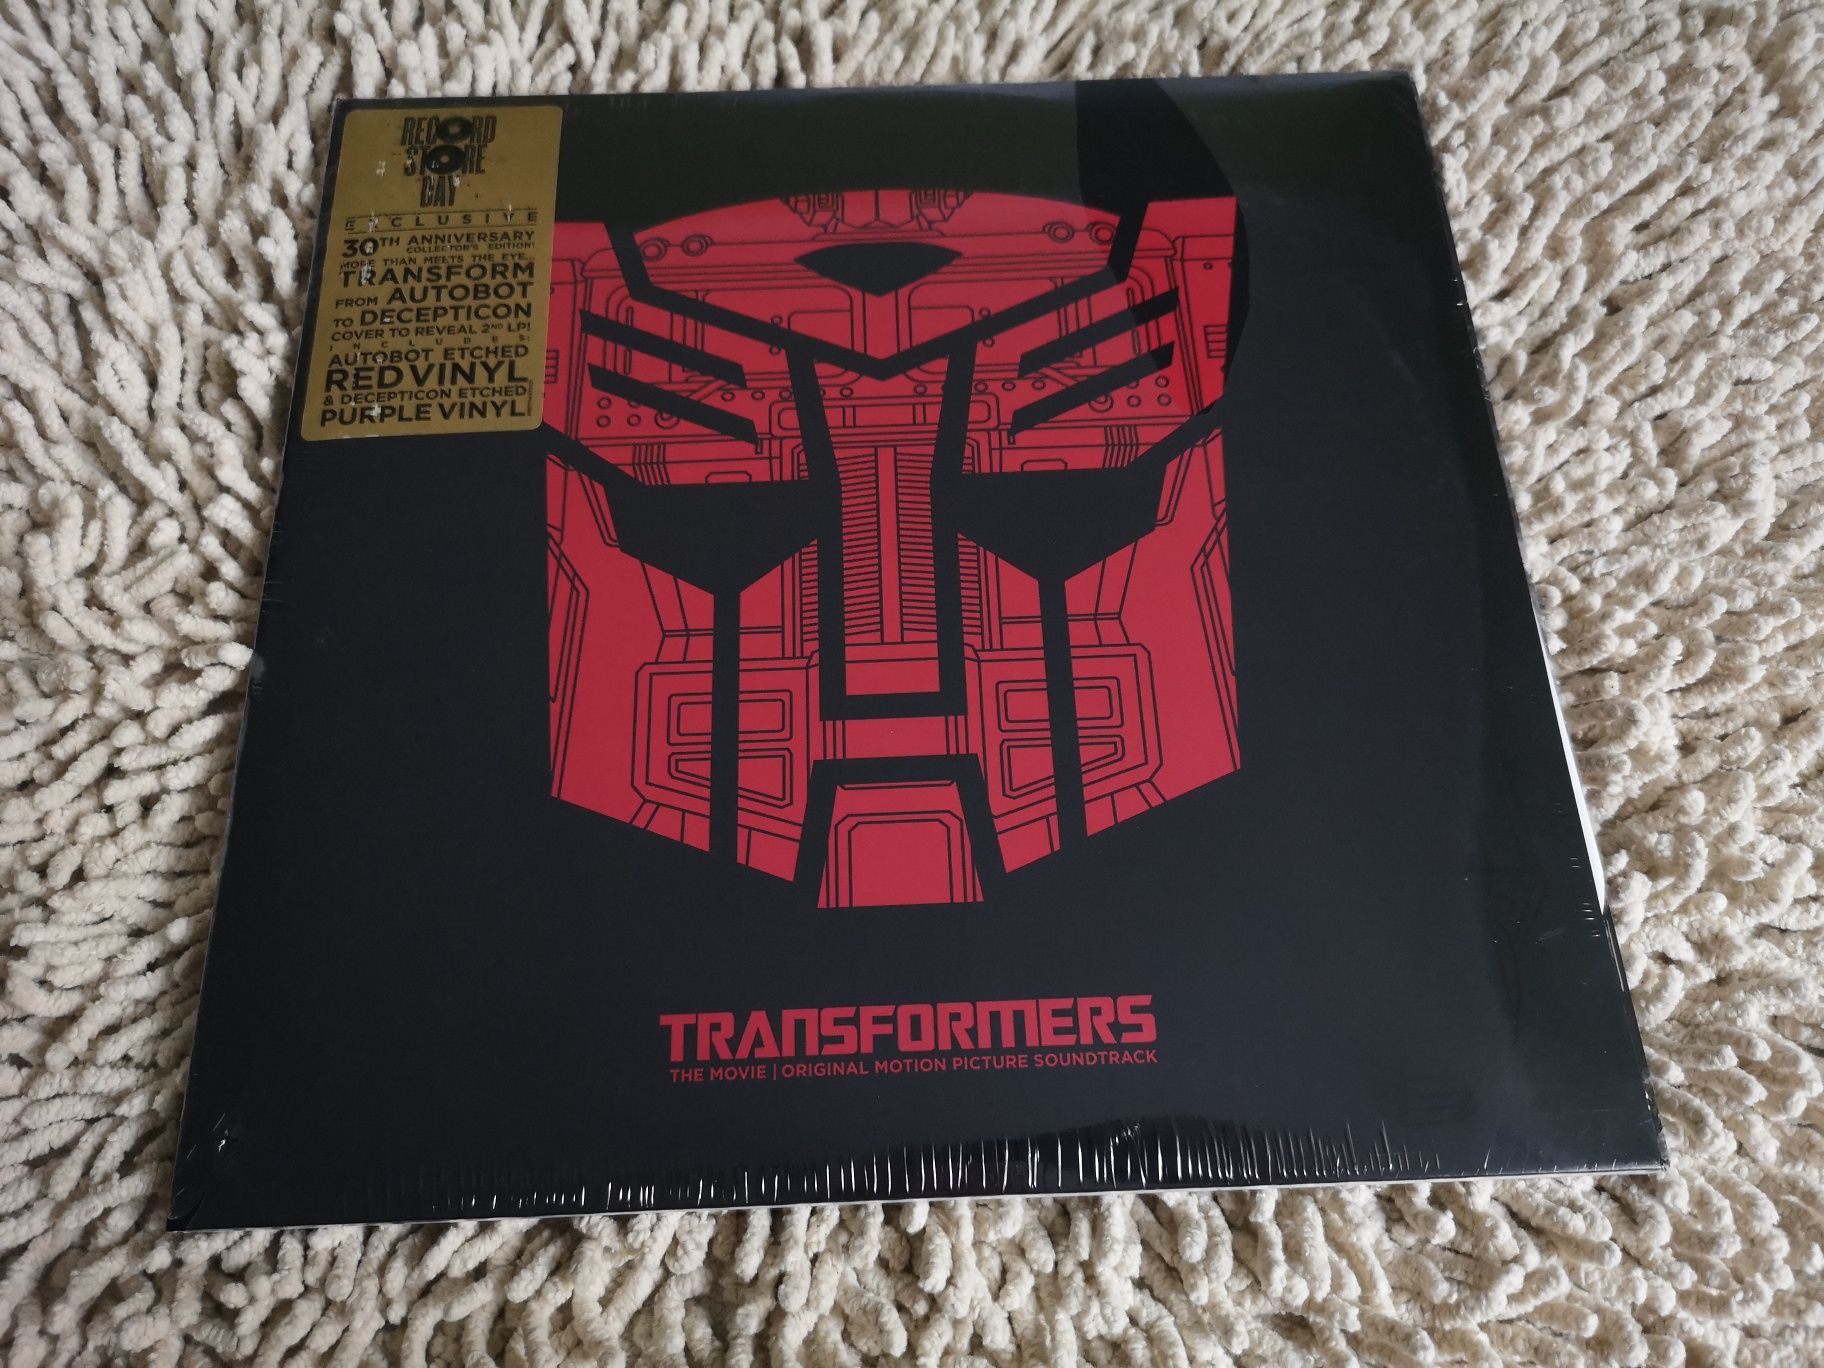 (Winyl) Transformers: The Movie - Original Motion Picture Soundtrack